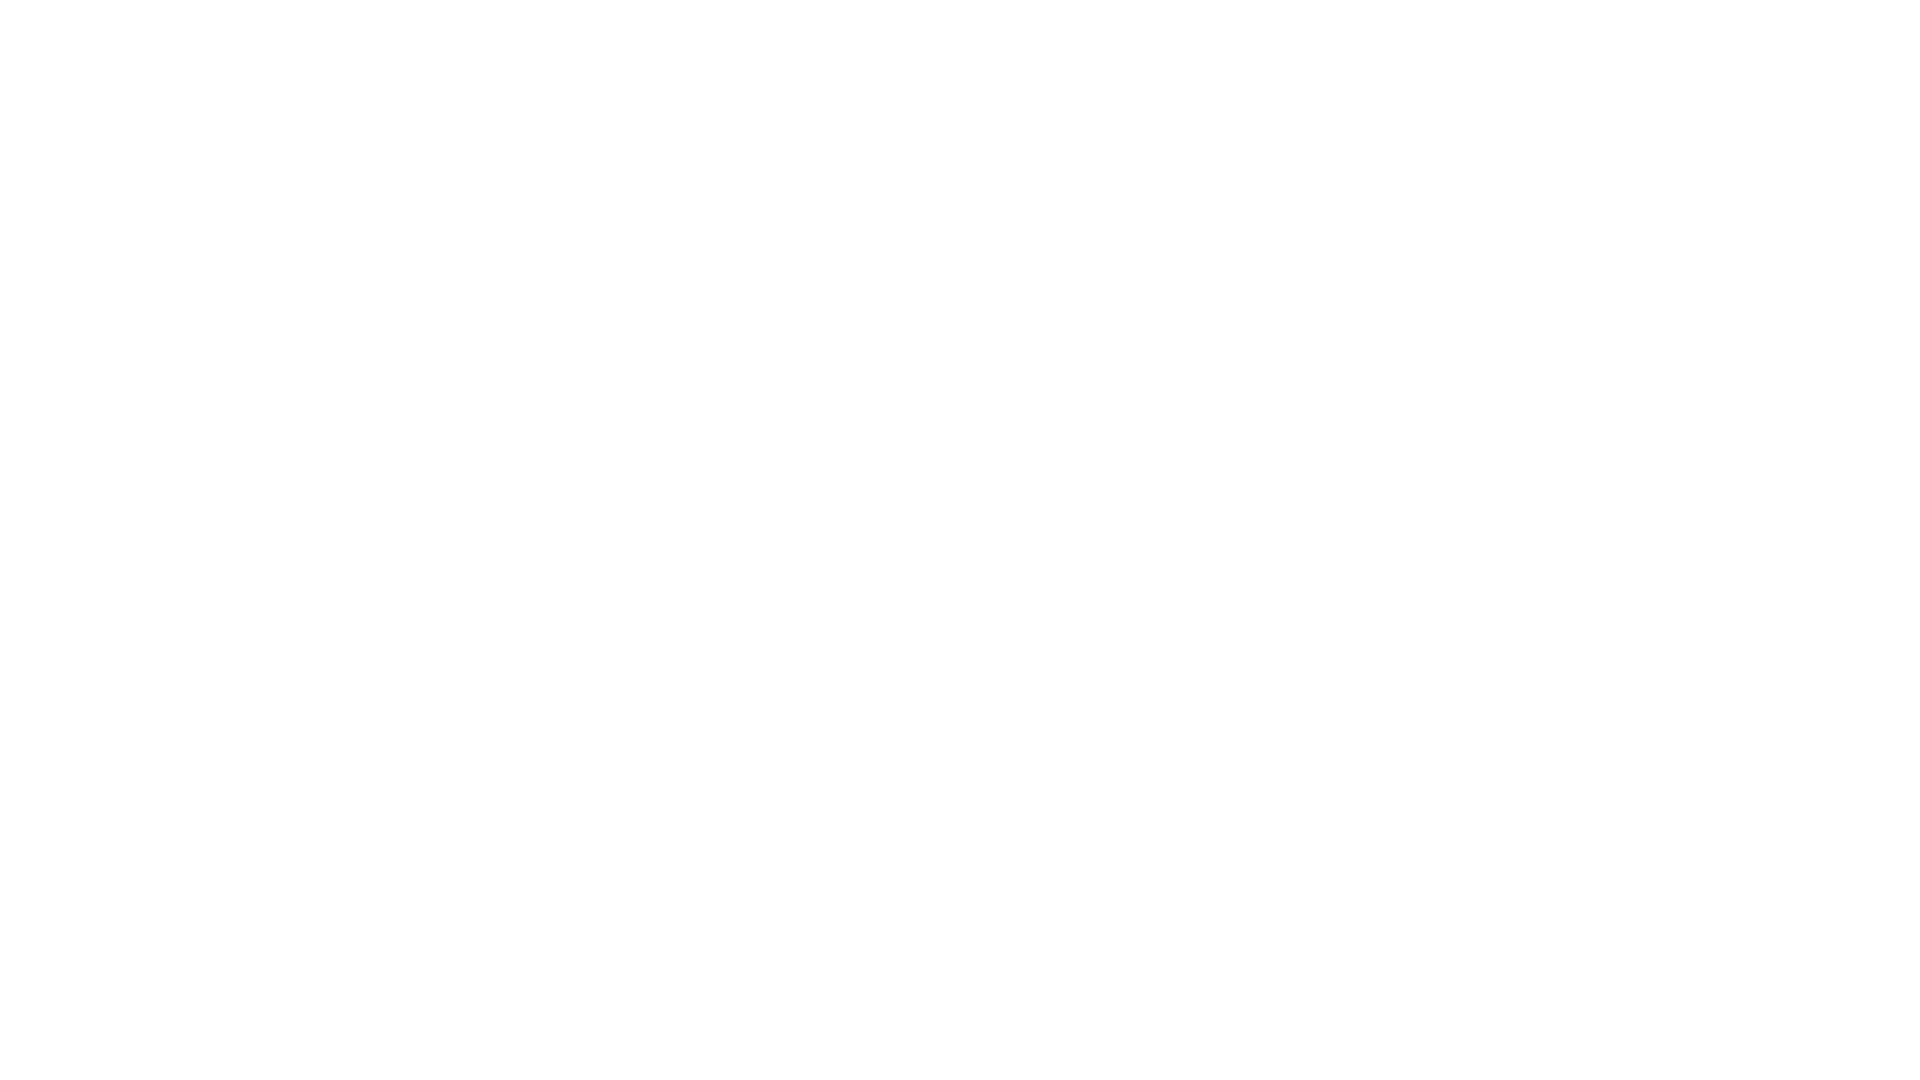 Ranksellr logo - Become an Amazon Kindle Besteller today!